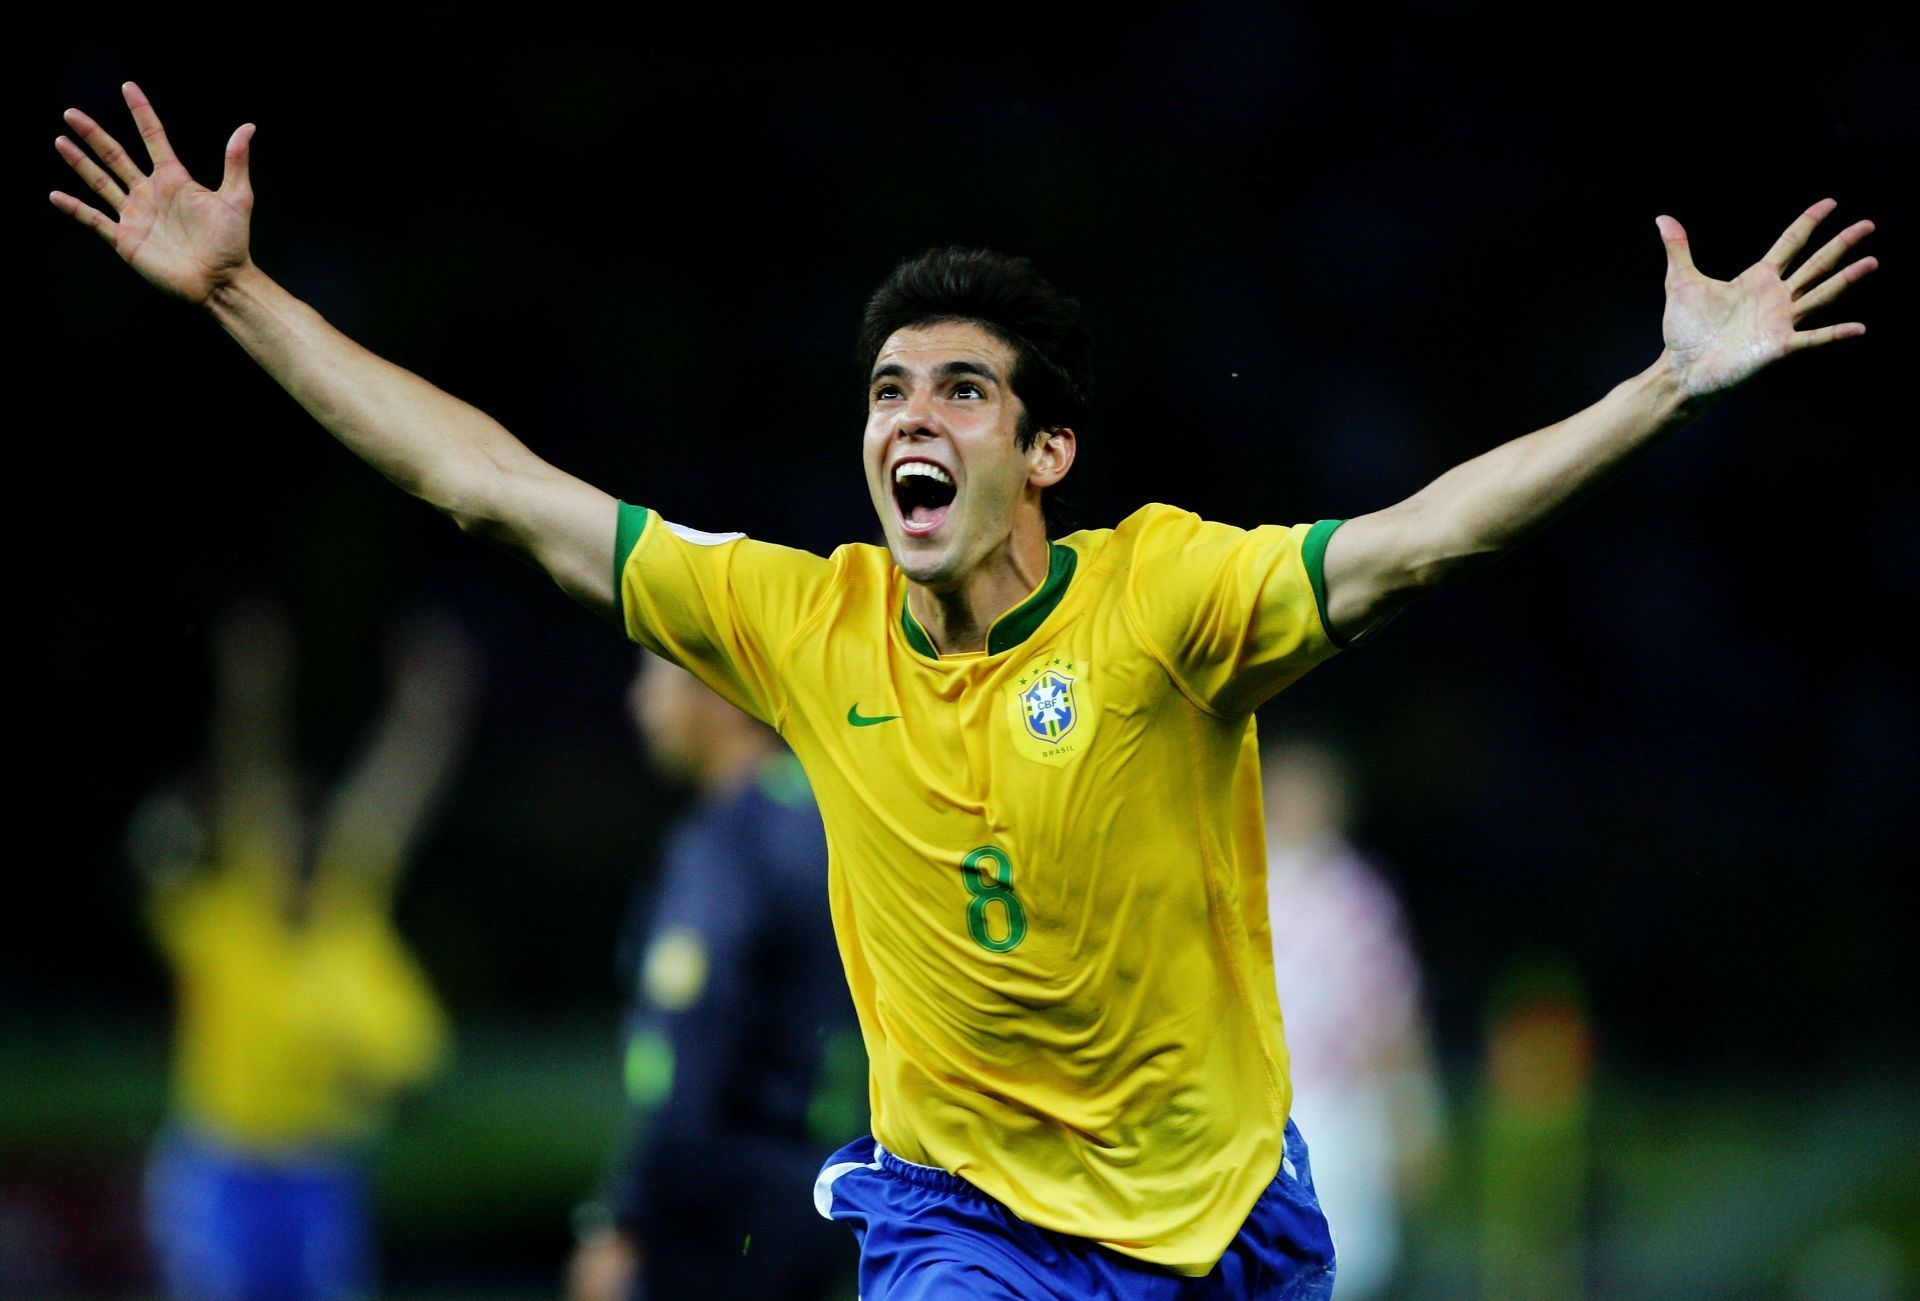 Kaka remains a true legend of the game.